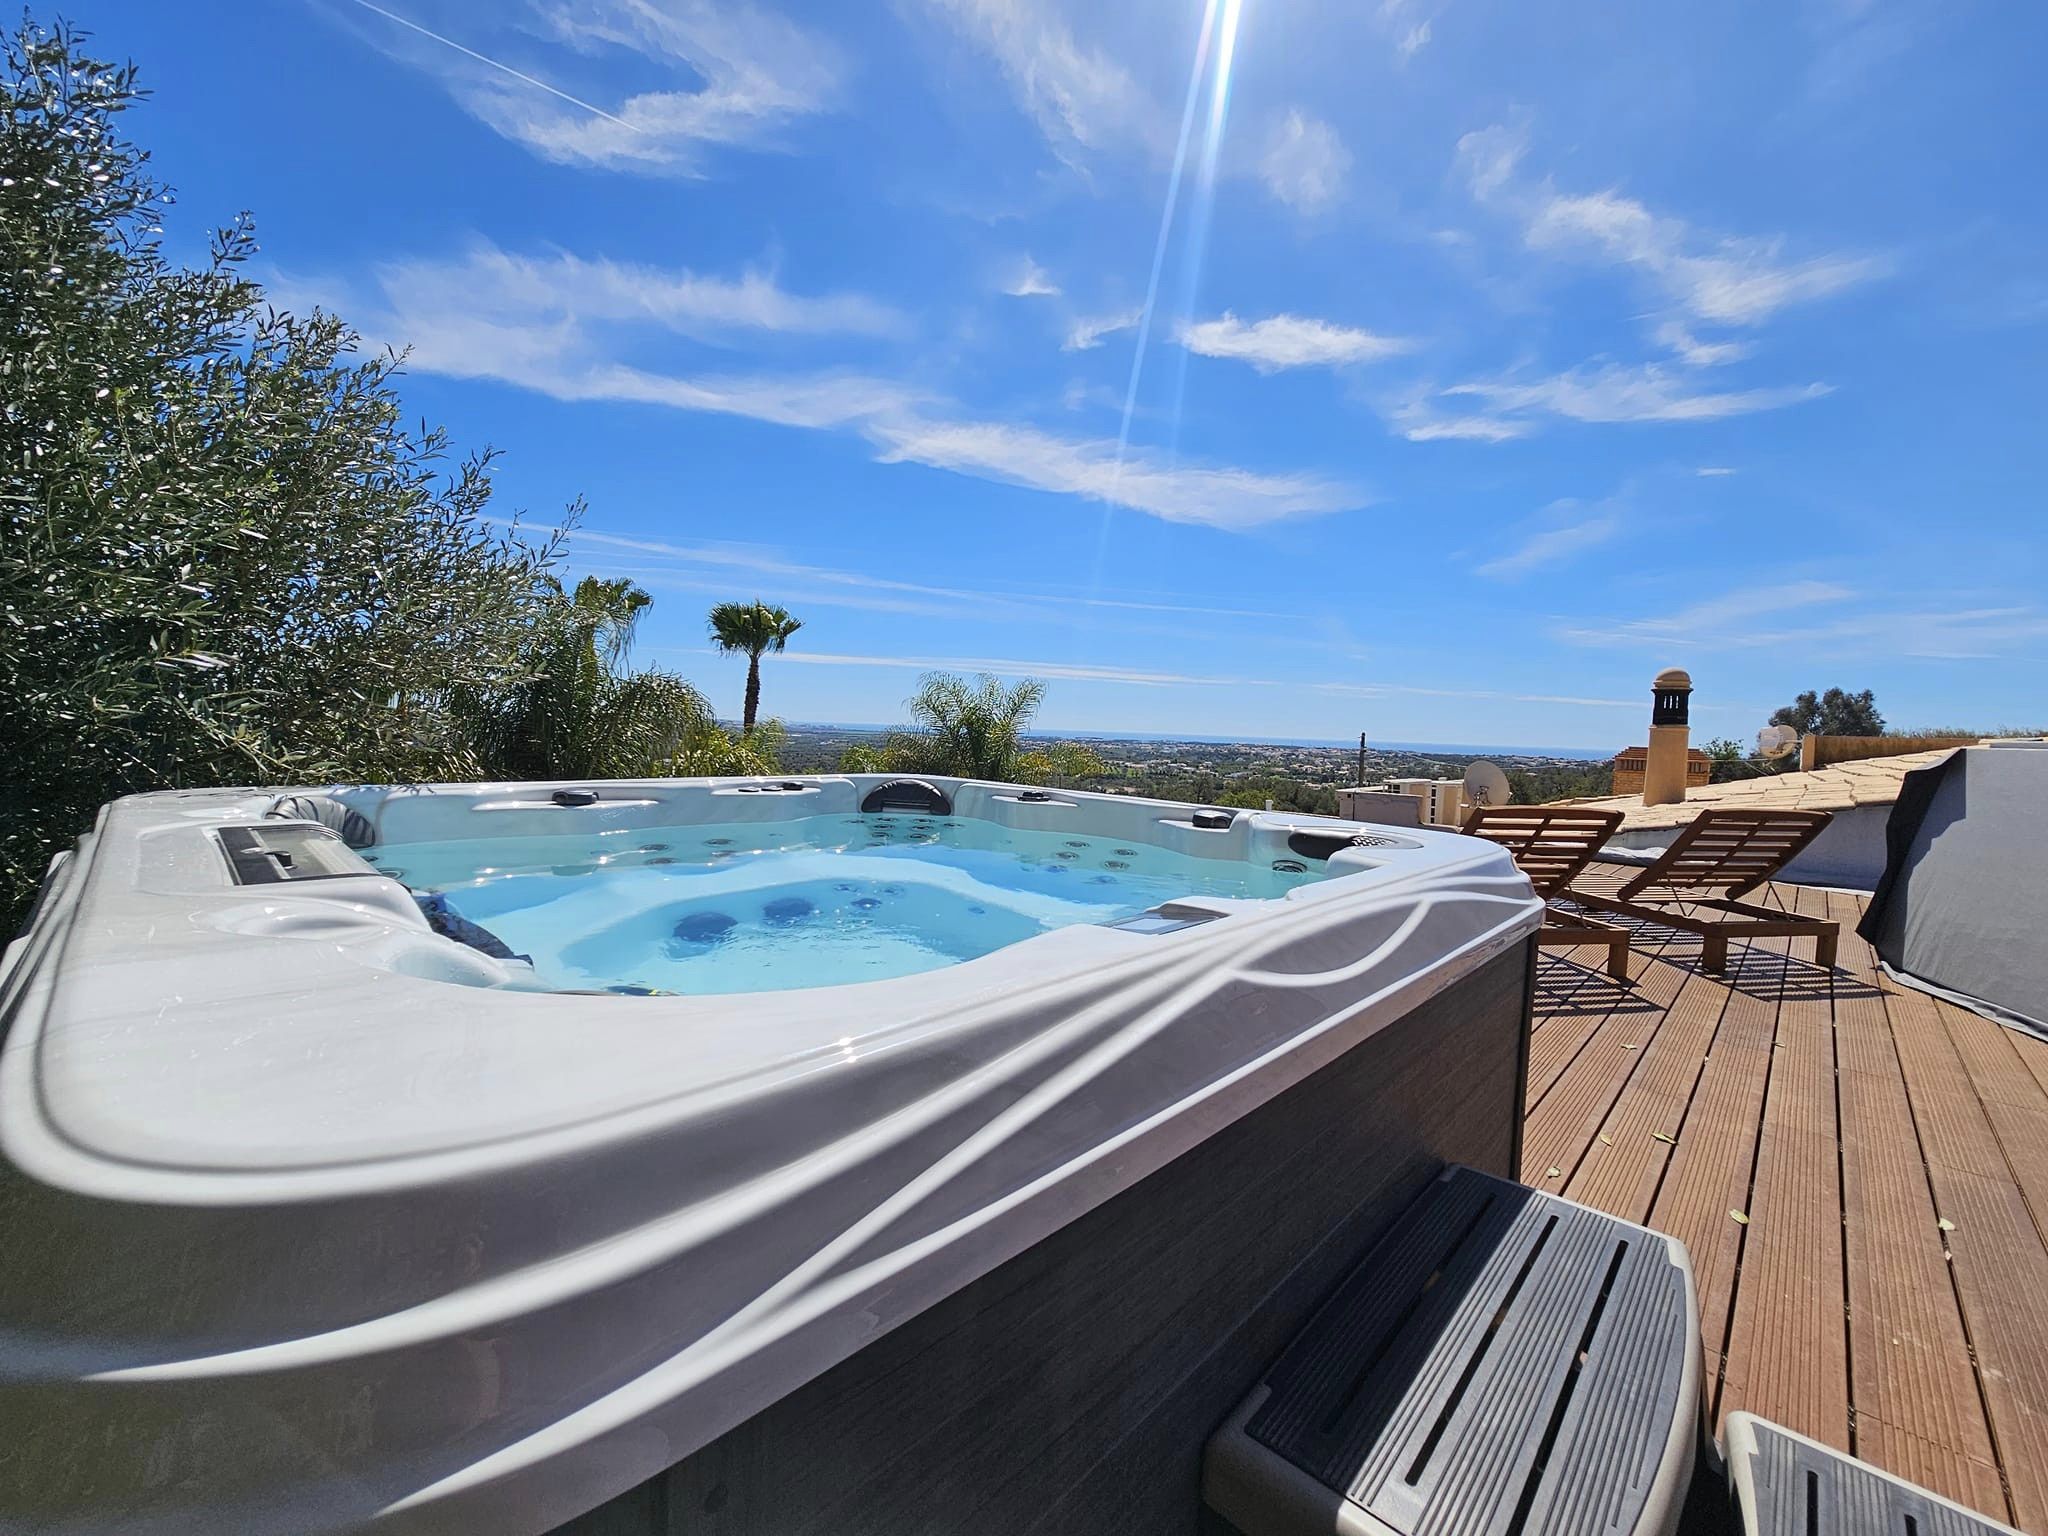 Hot tub of the month in a luxurious